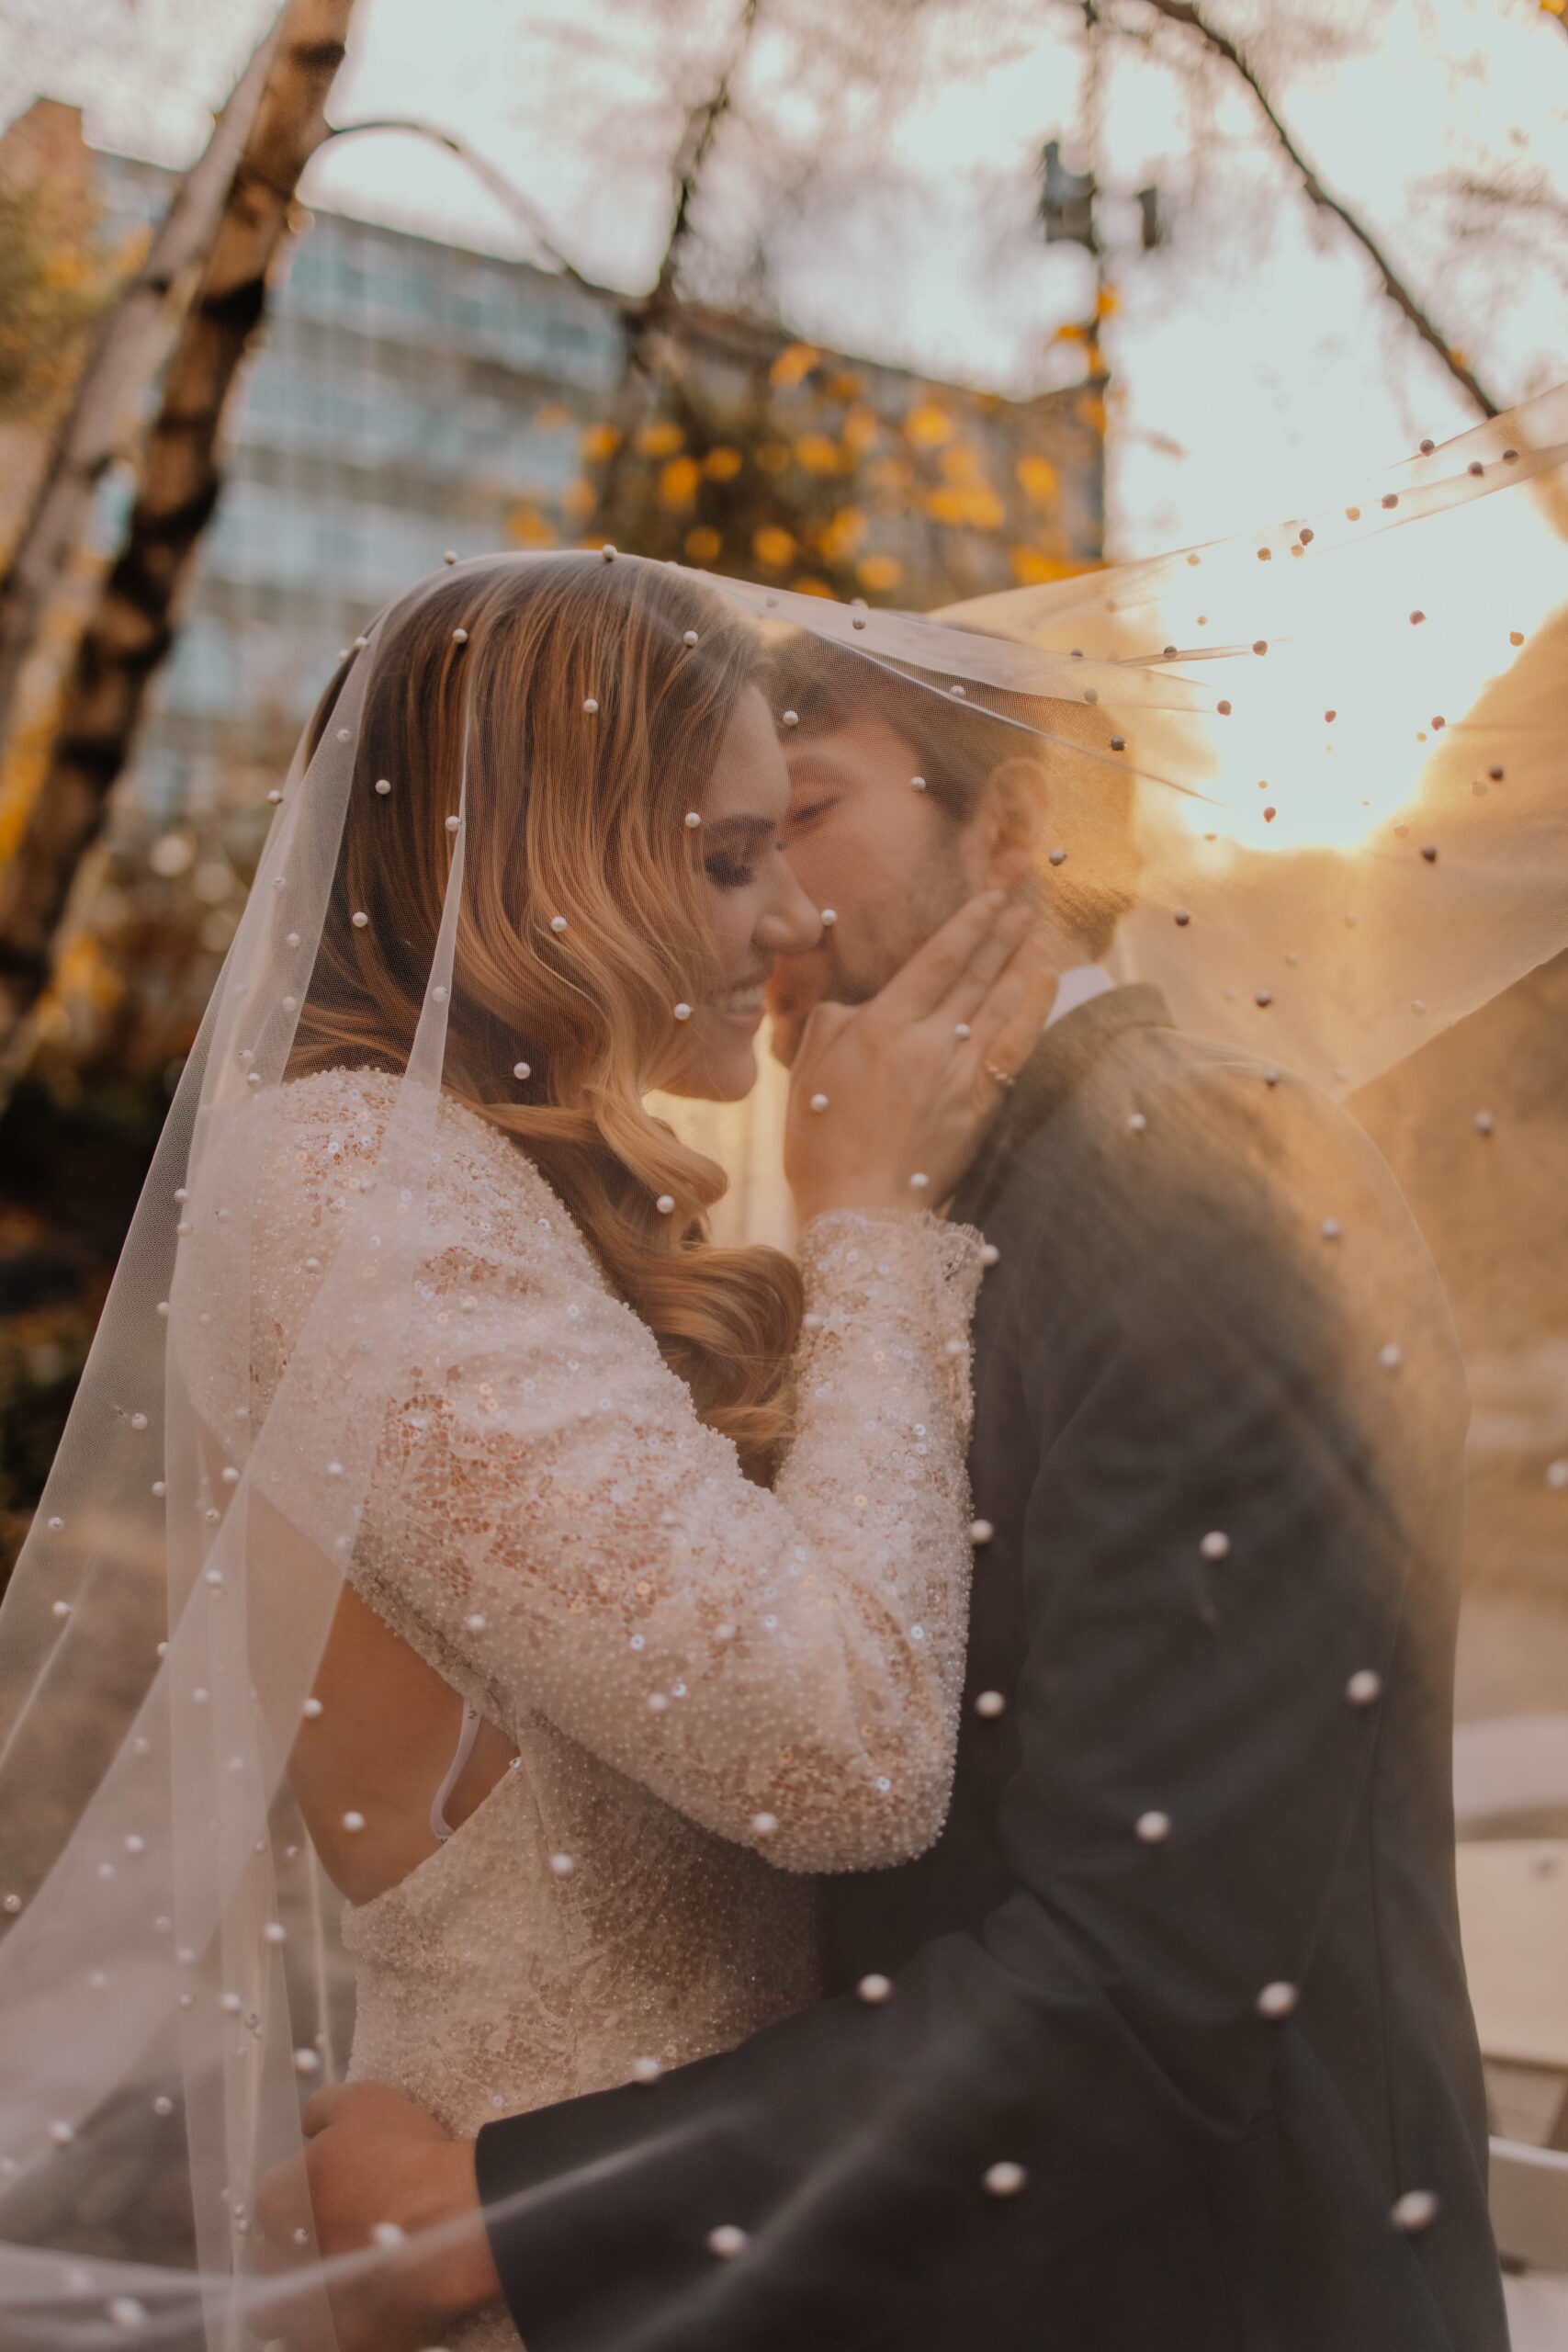 Stunning pearl veil shot of wedding couple during sunset in Minneapolis